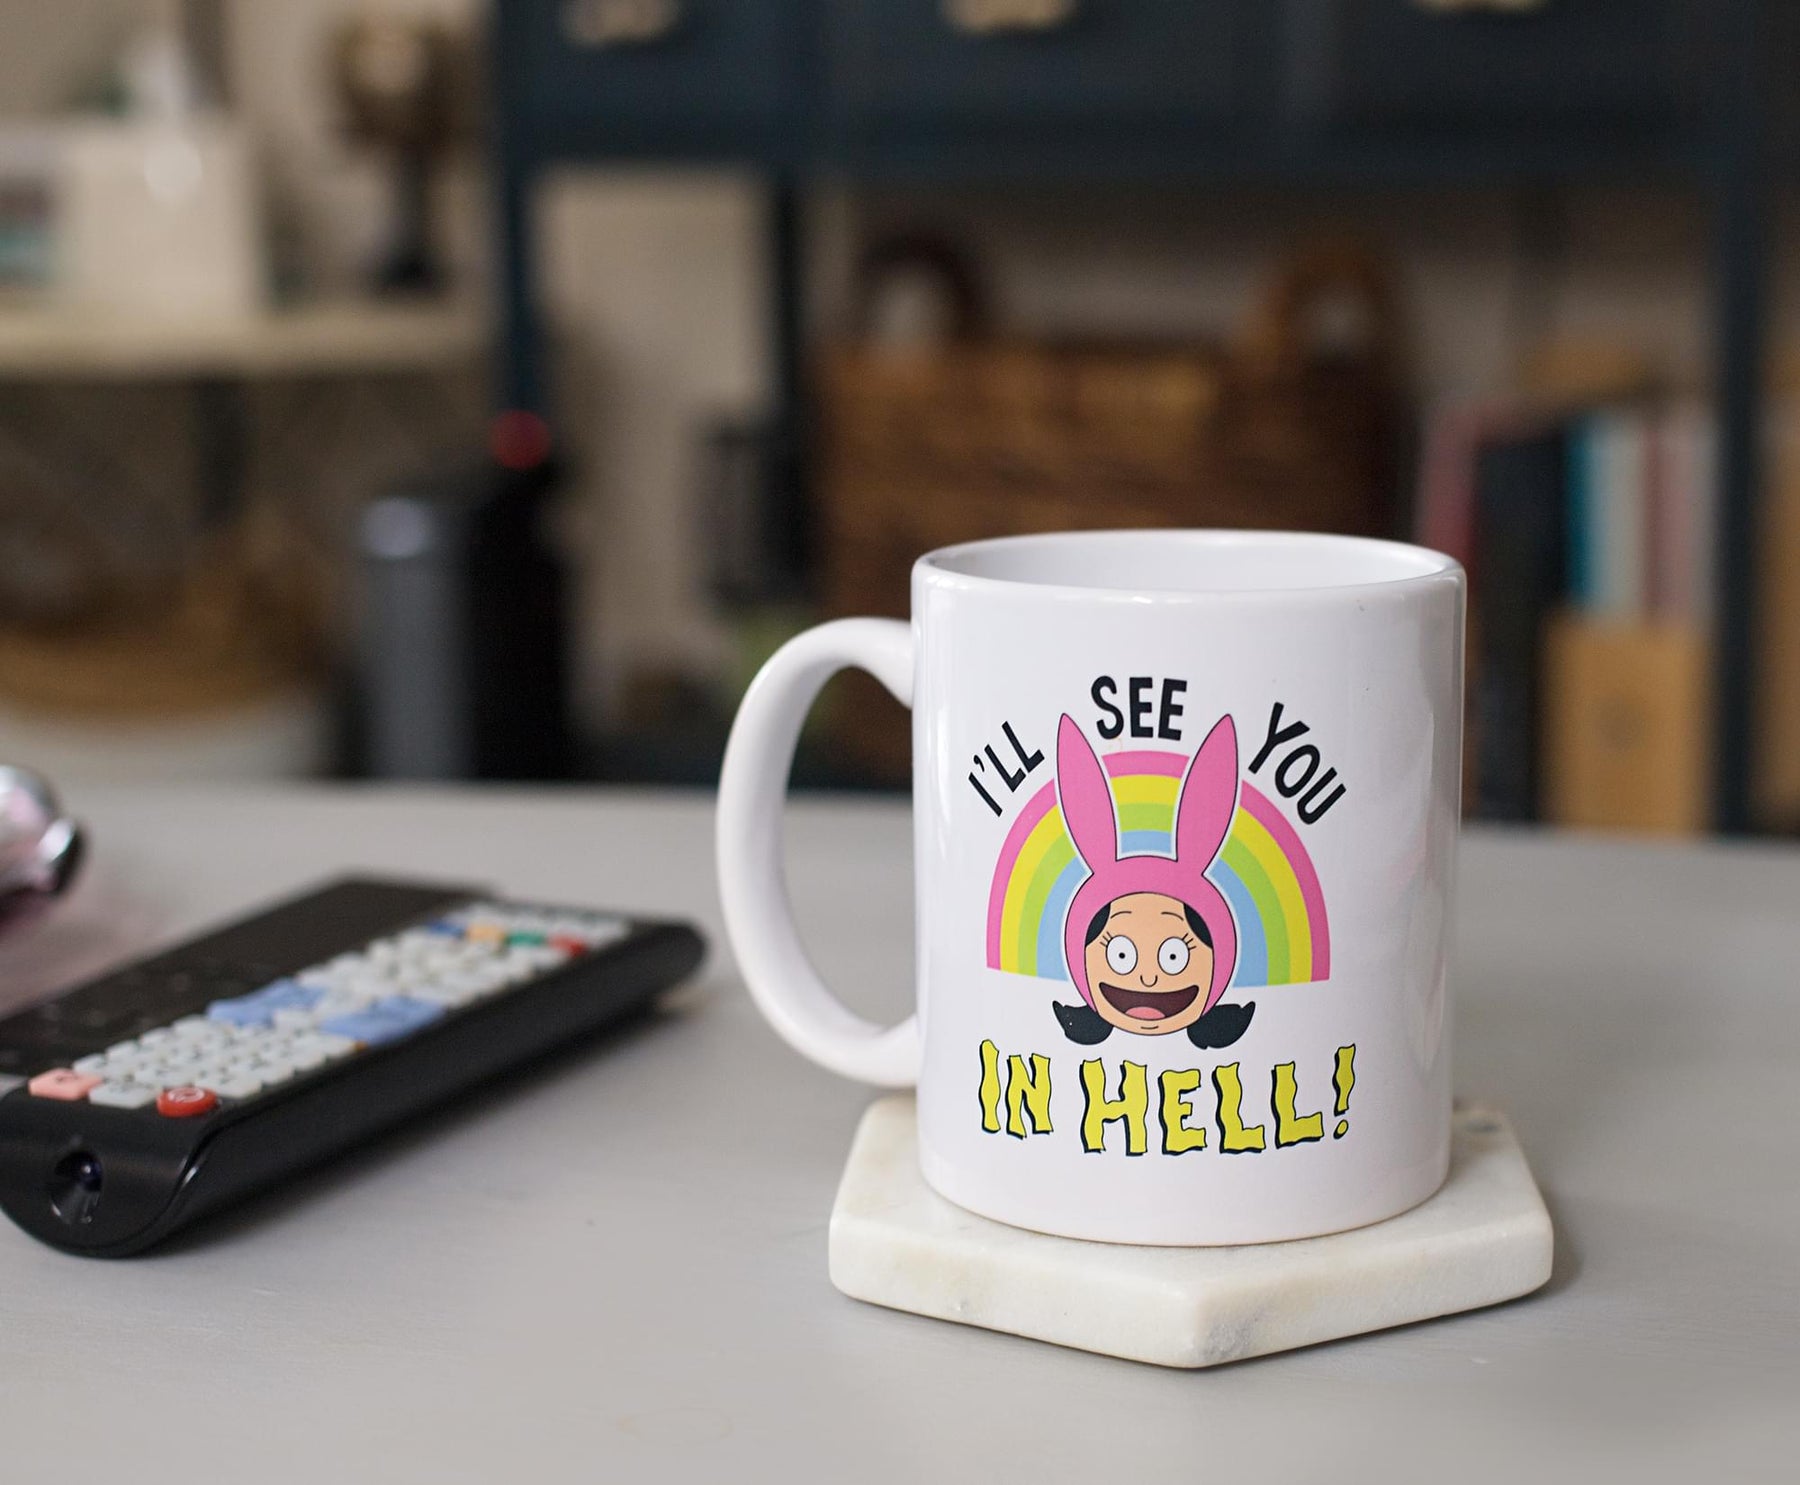 Bob's Burgers "I'll See You In Hell" Ceramic Mug | Holds 11 Ounces